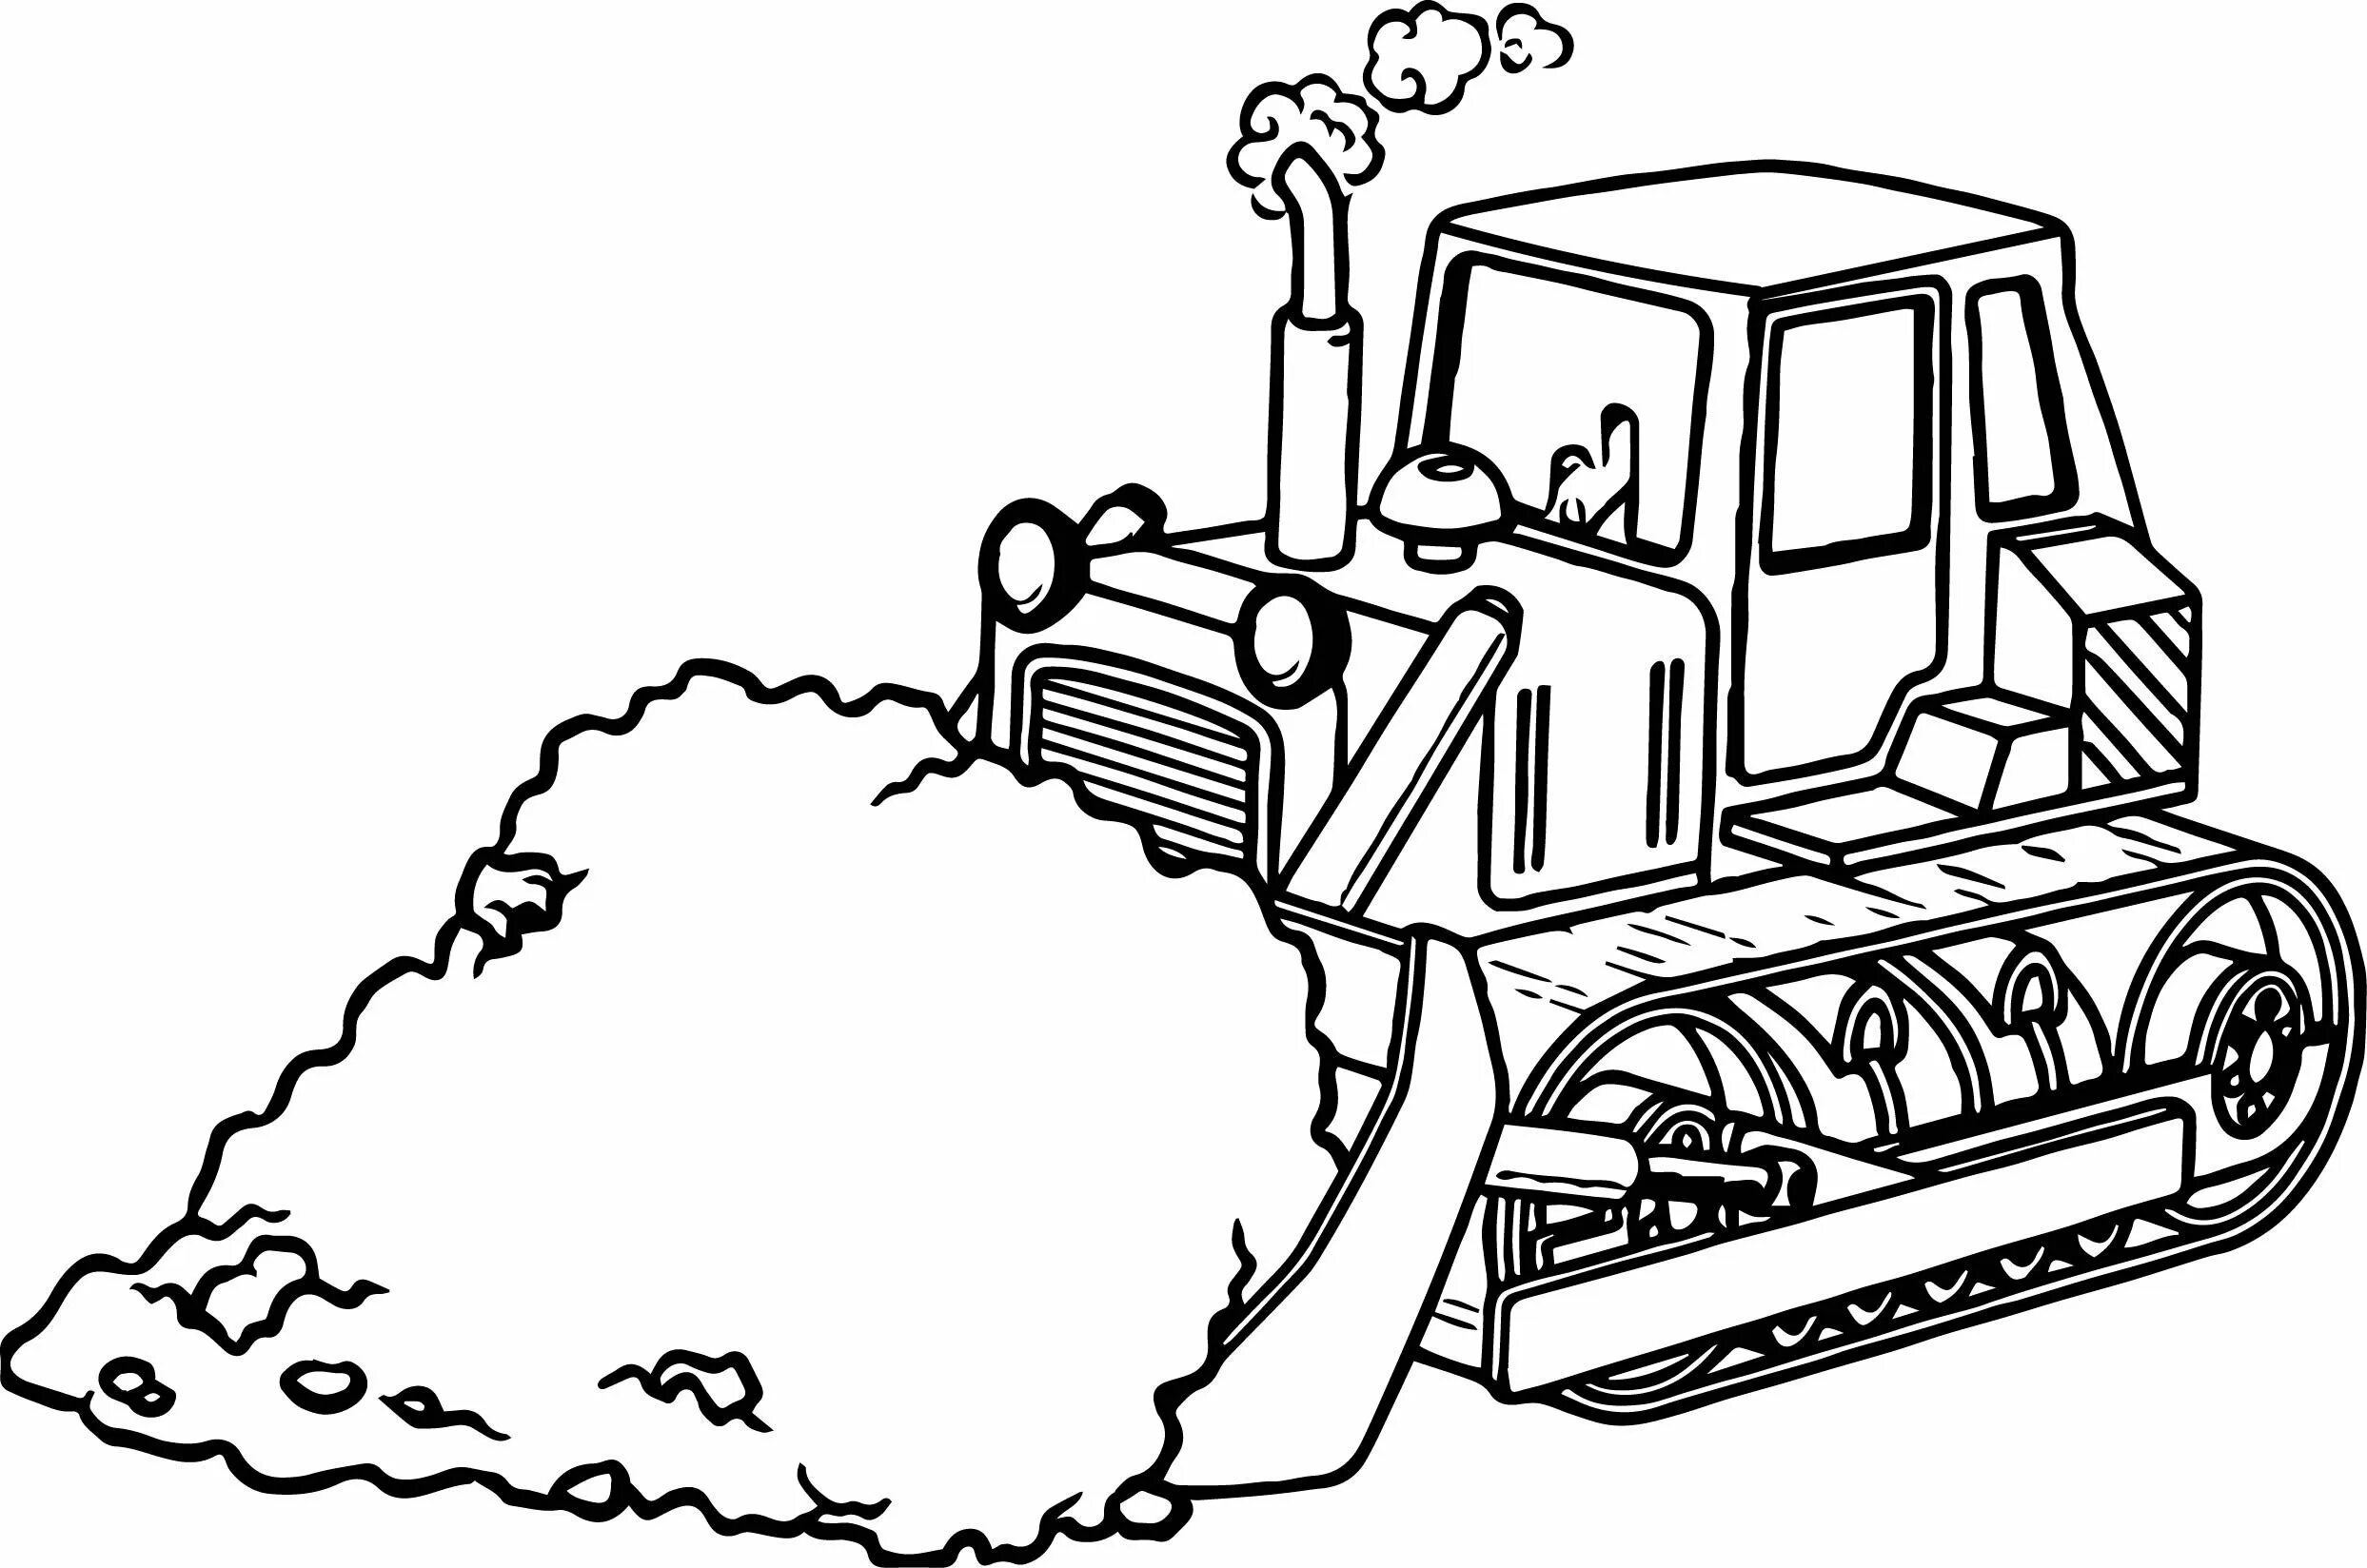 Superb bulldozer coloring pages for kids